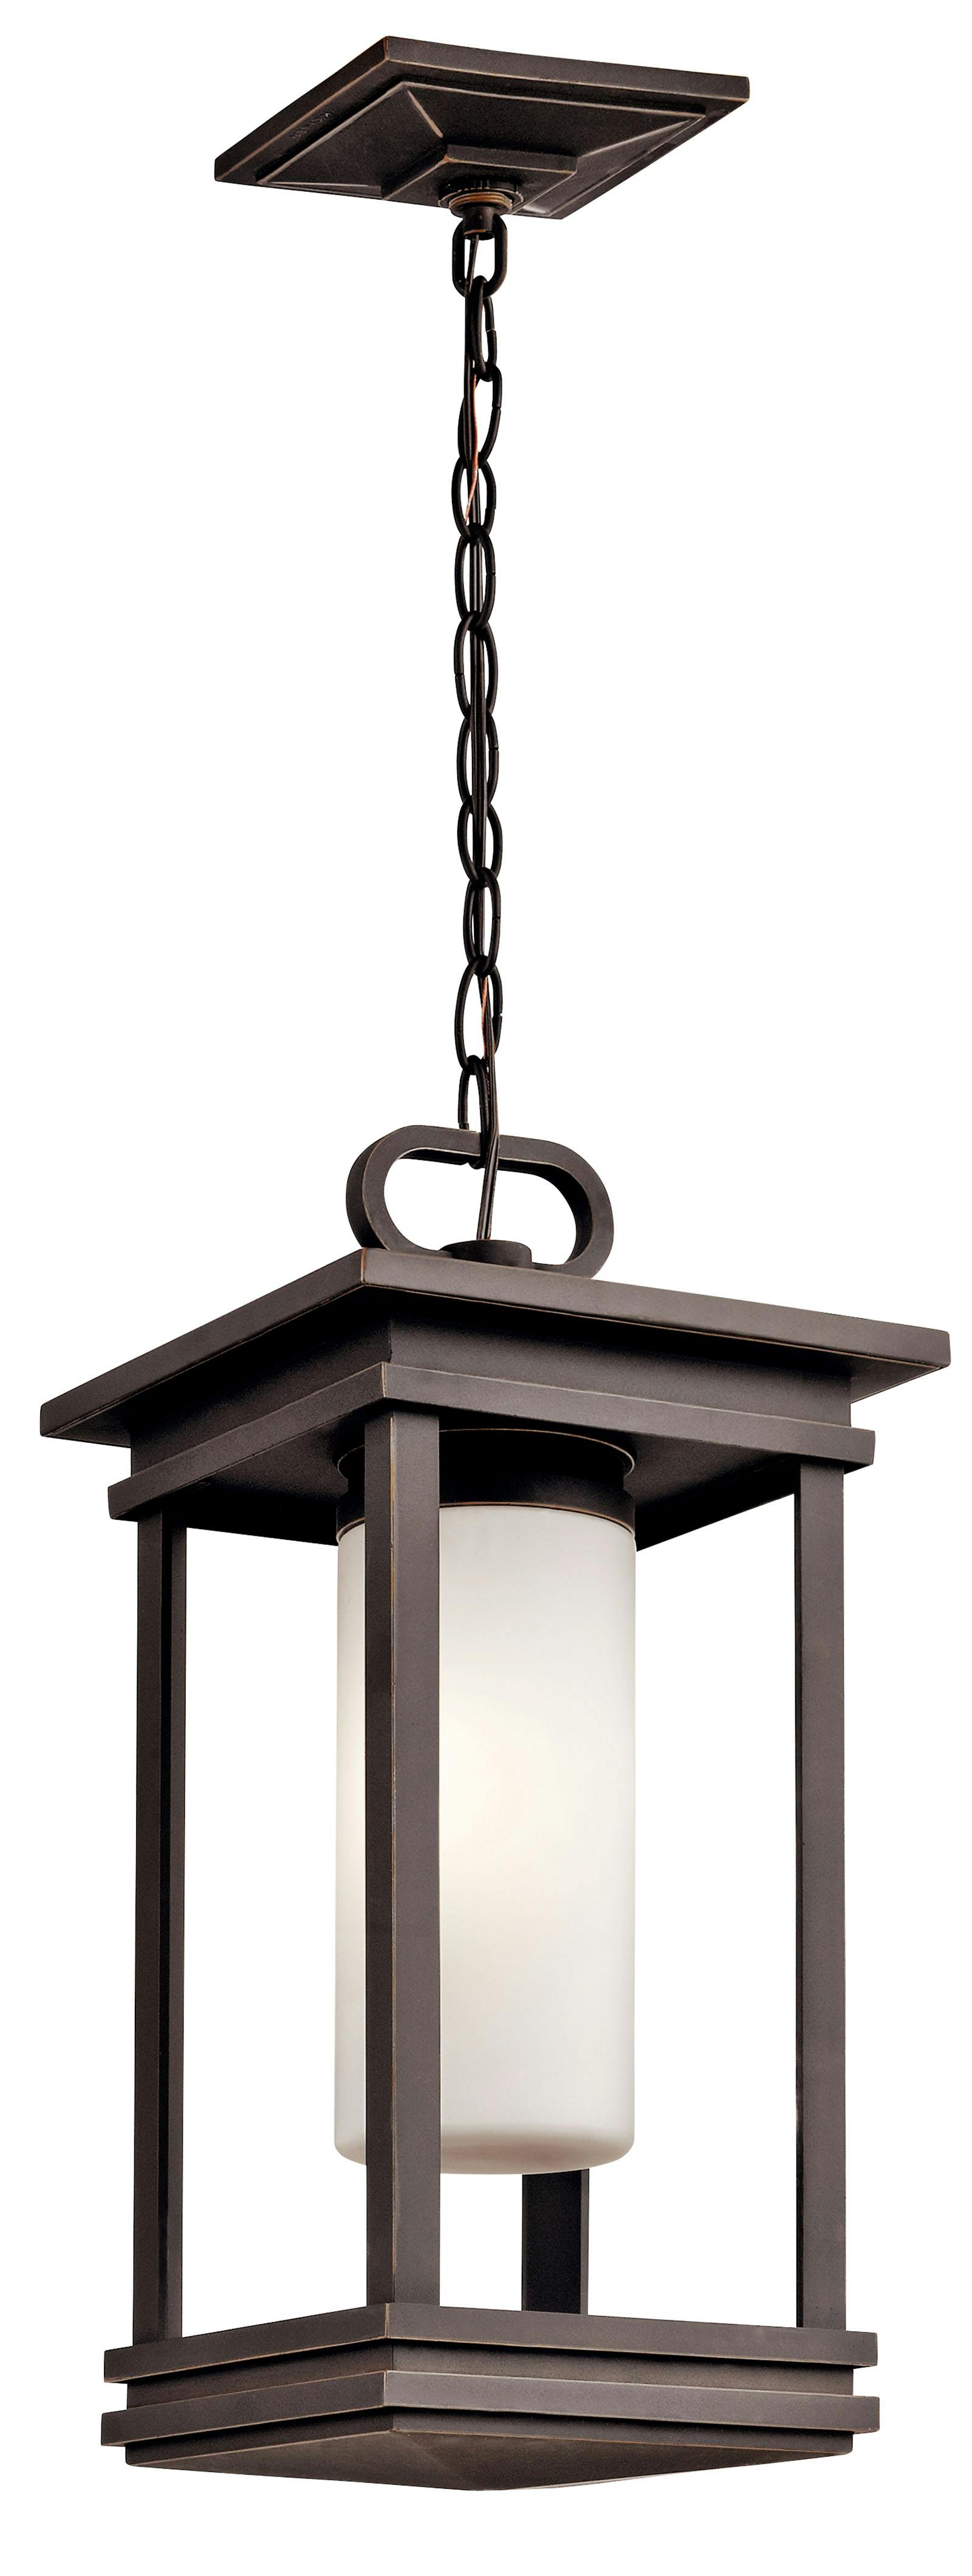 South Hope™ 9" Pendant Rubbed Bronze™ on a white background